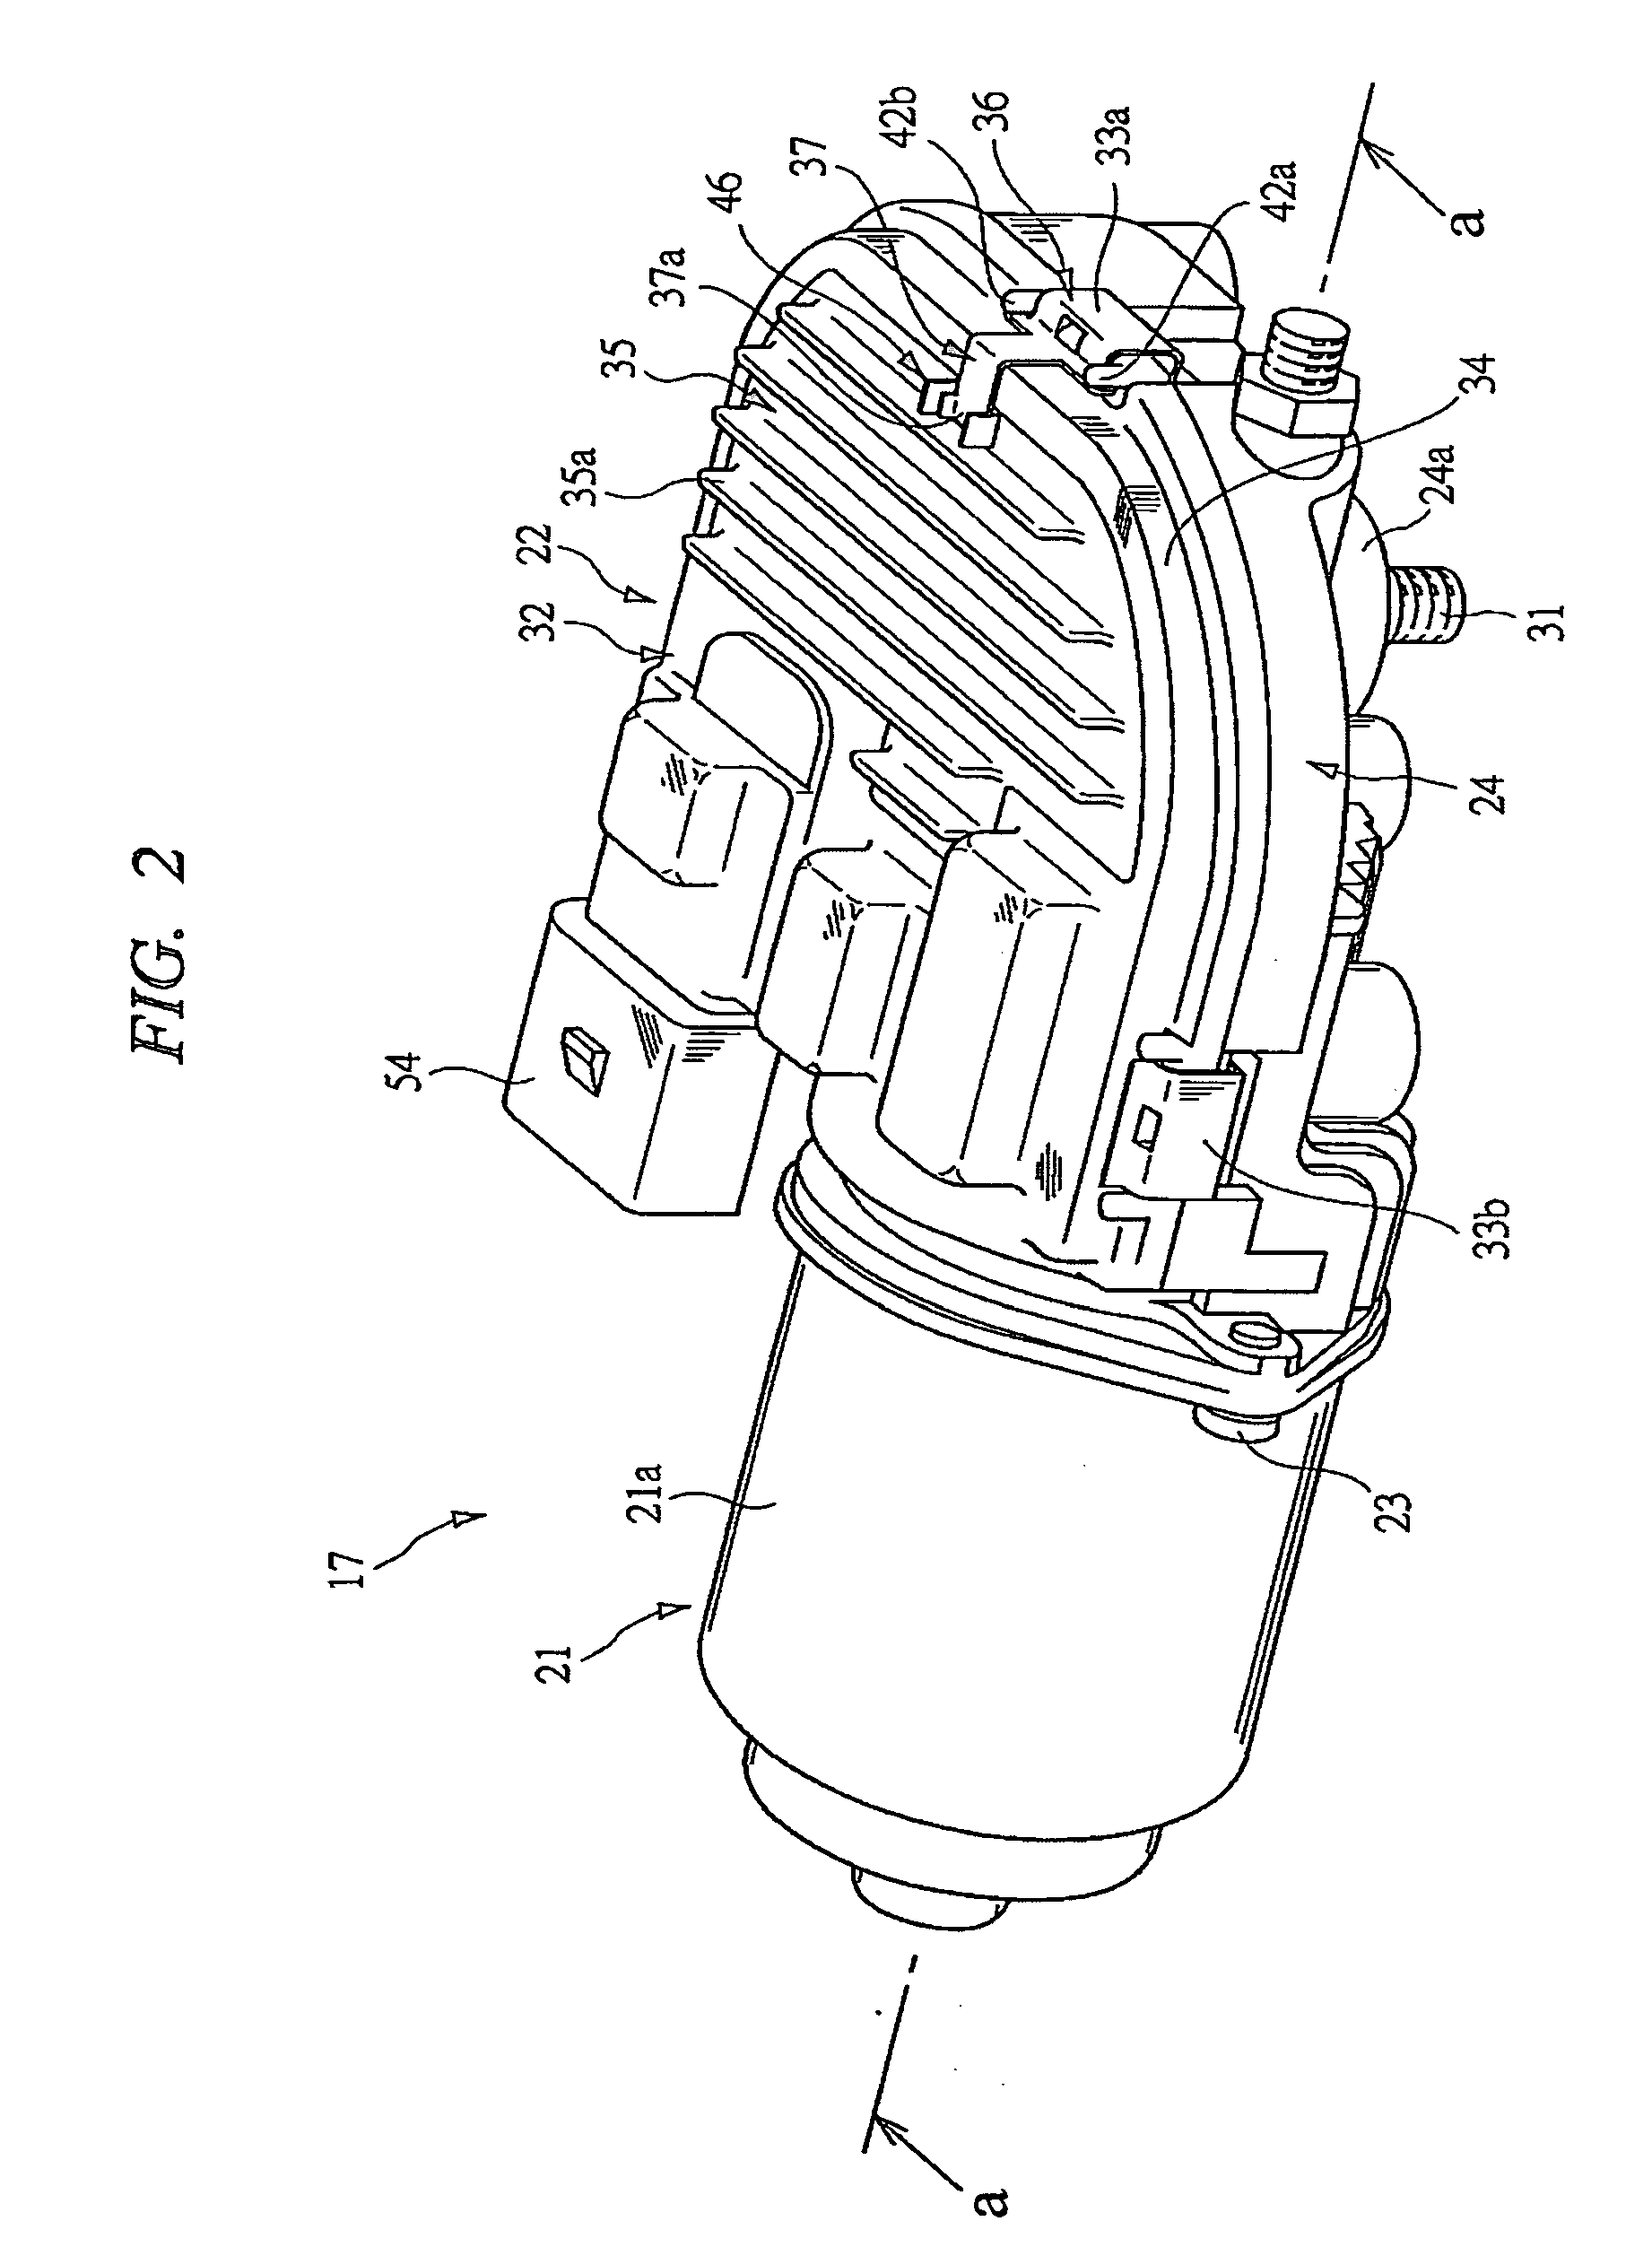 Motor cover and electric motor equipped with the same